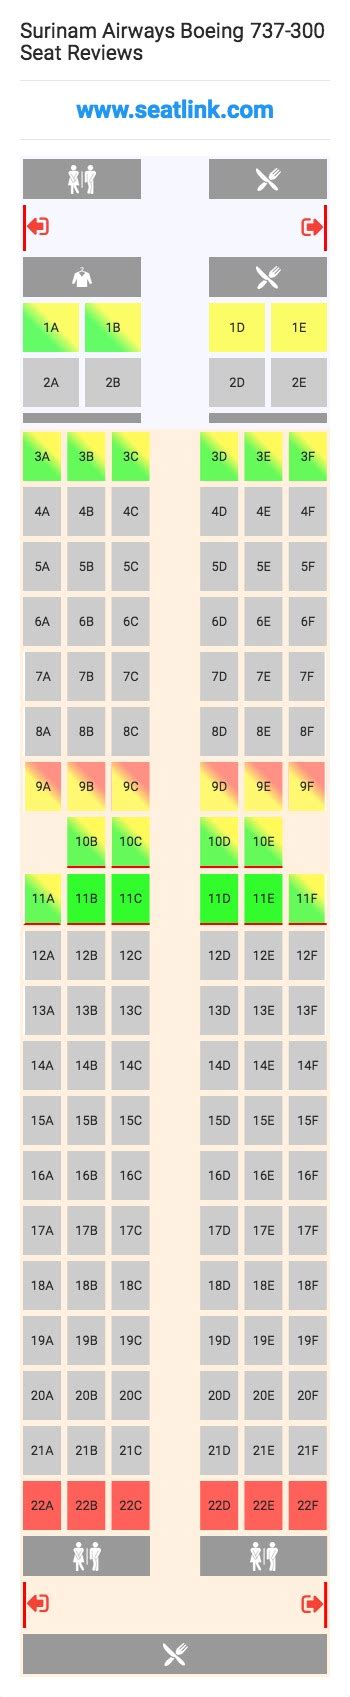 Surinam Airways Boeing Seat Map Seating Charts American Airlines Airbus